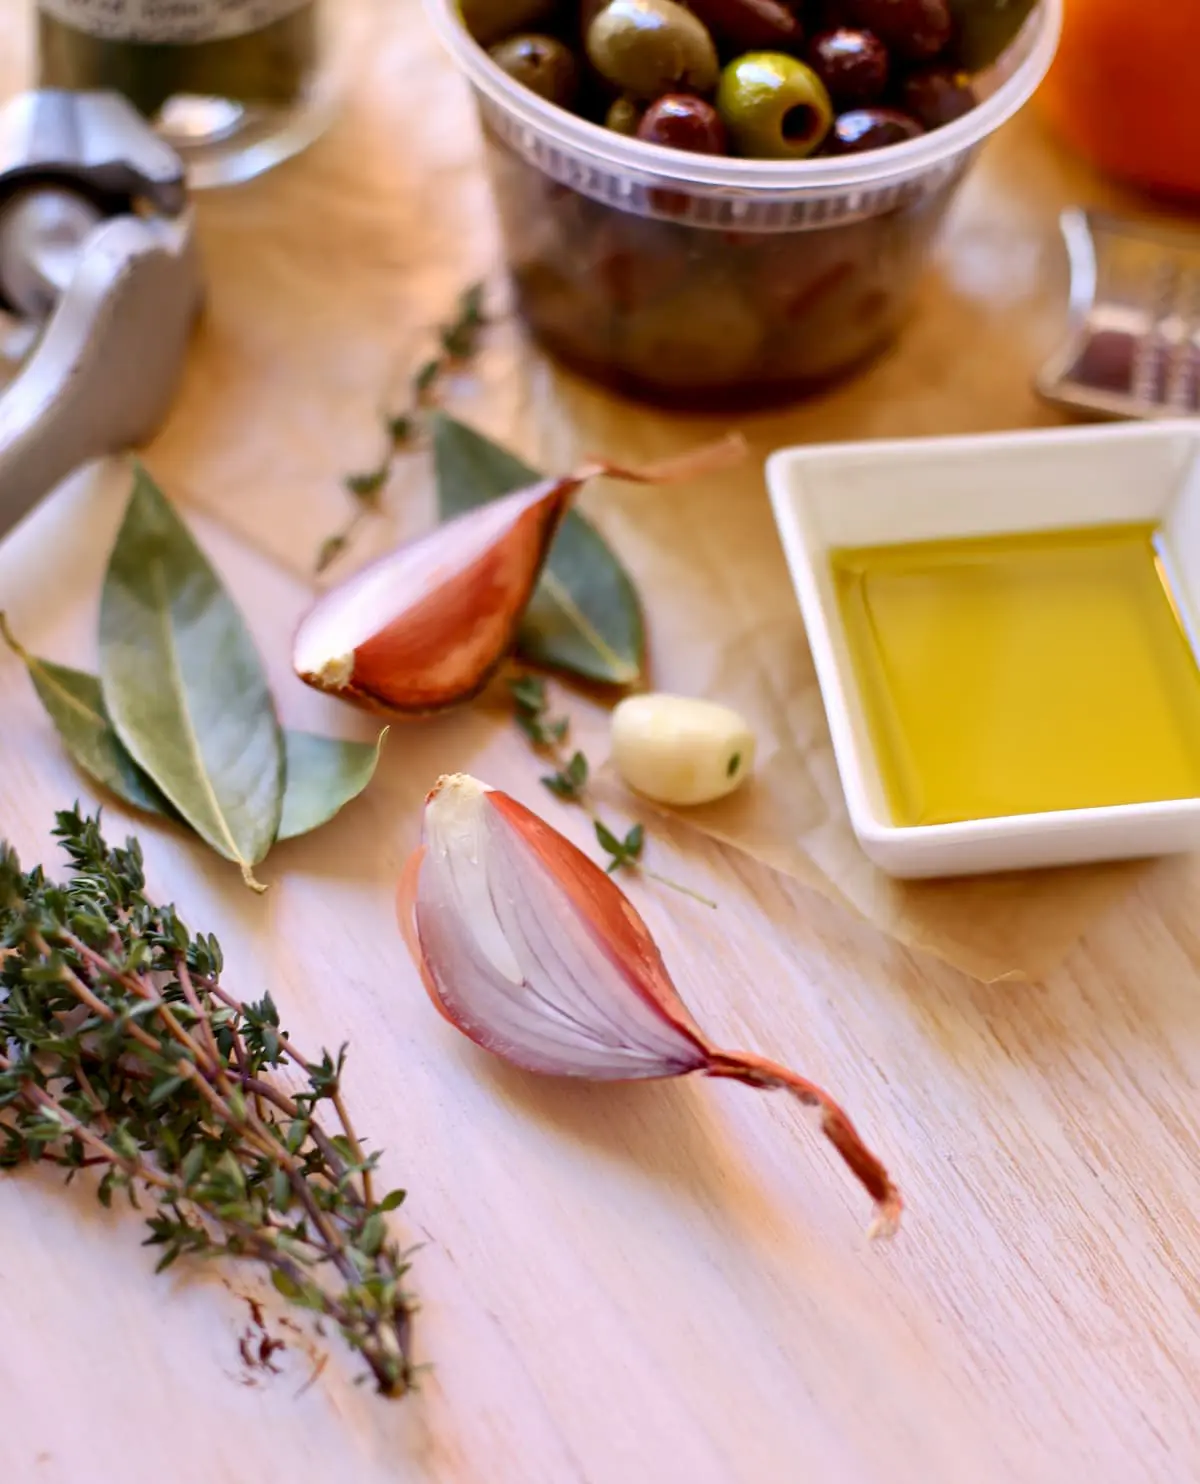 a shallot and other ingredients and herbs on a table